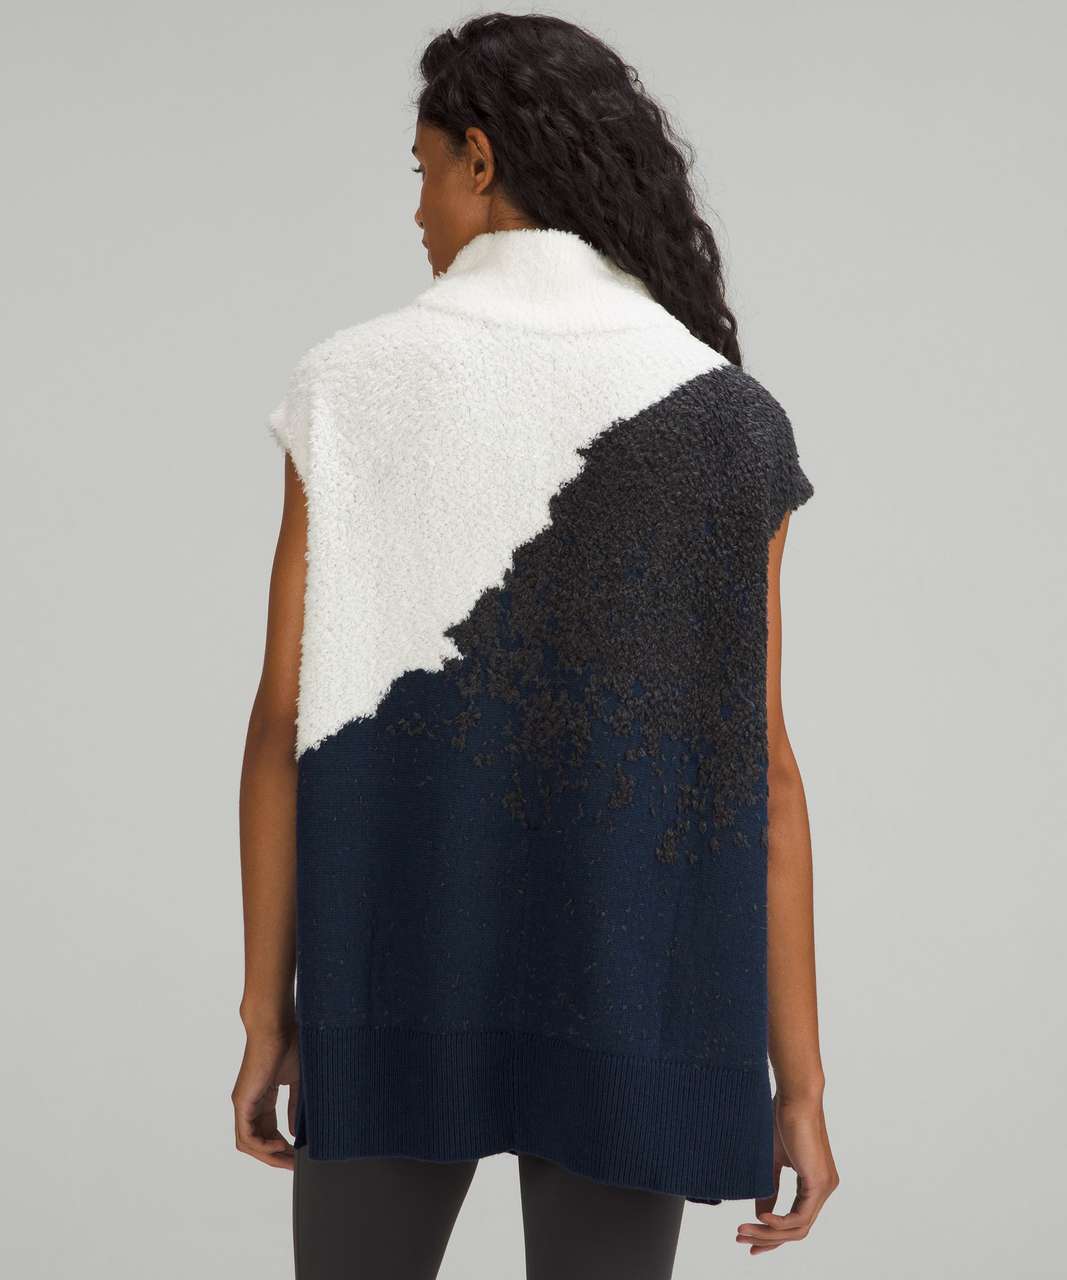 Lululemon Ombre Knit Textured Poncho - Bone / Mineral Blue / Graphite Grey